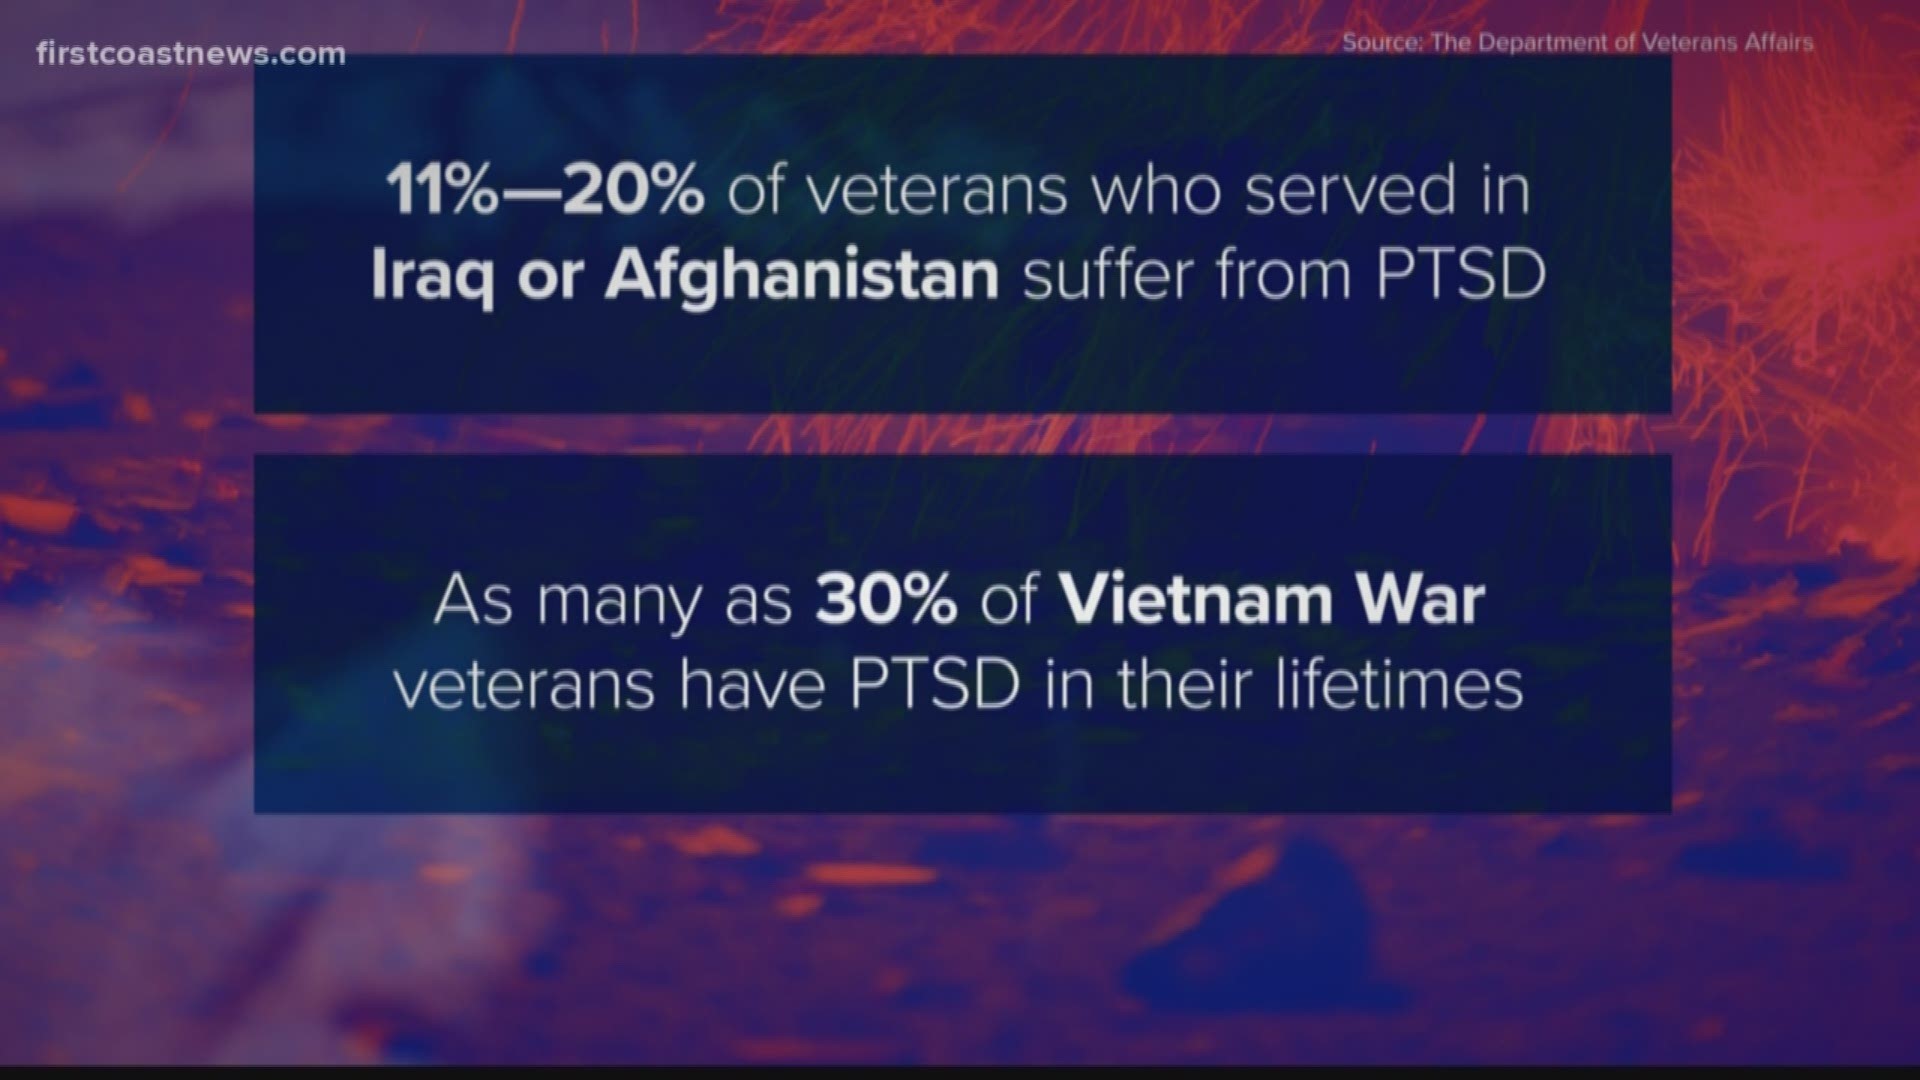 Before you set off fireworks this July 4, pause to think about your neighbors who may be battling PTSD.